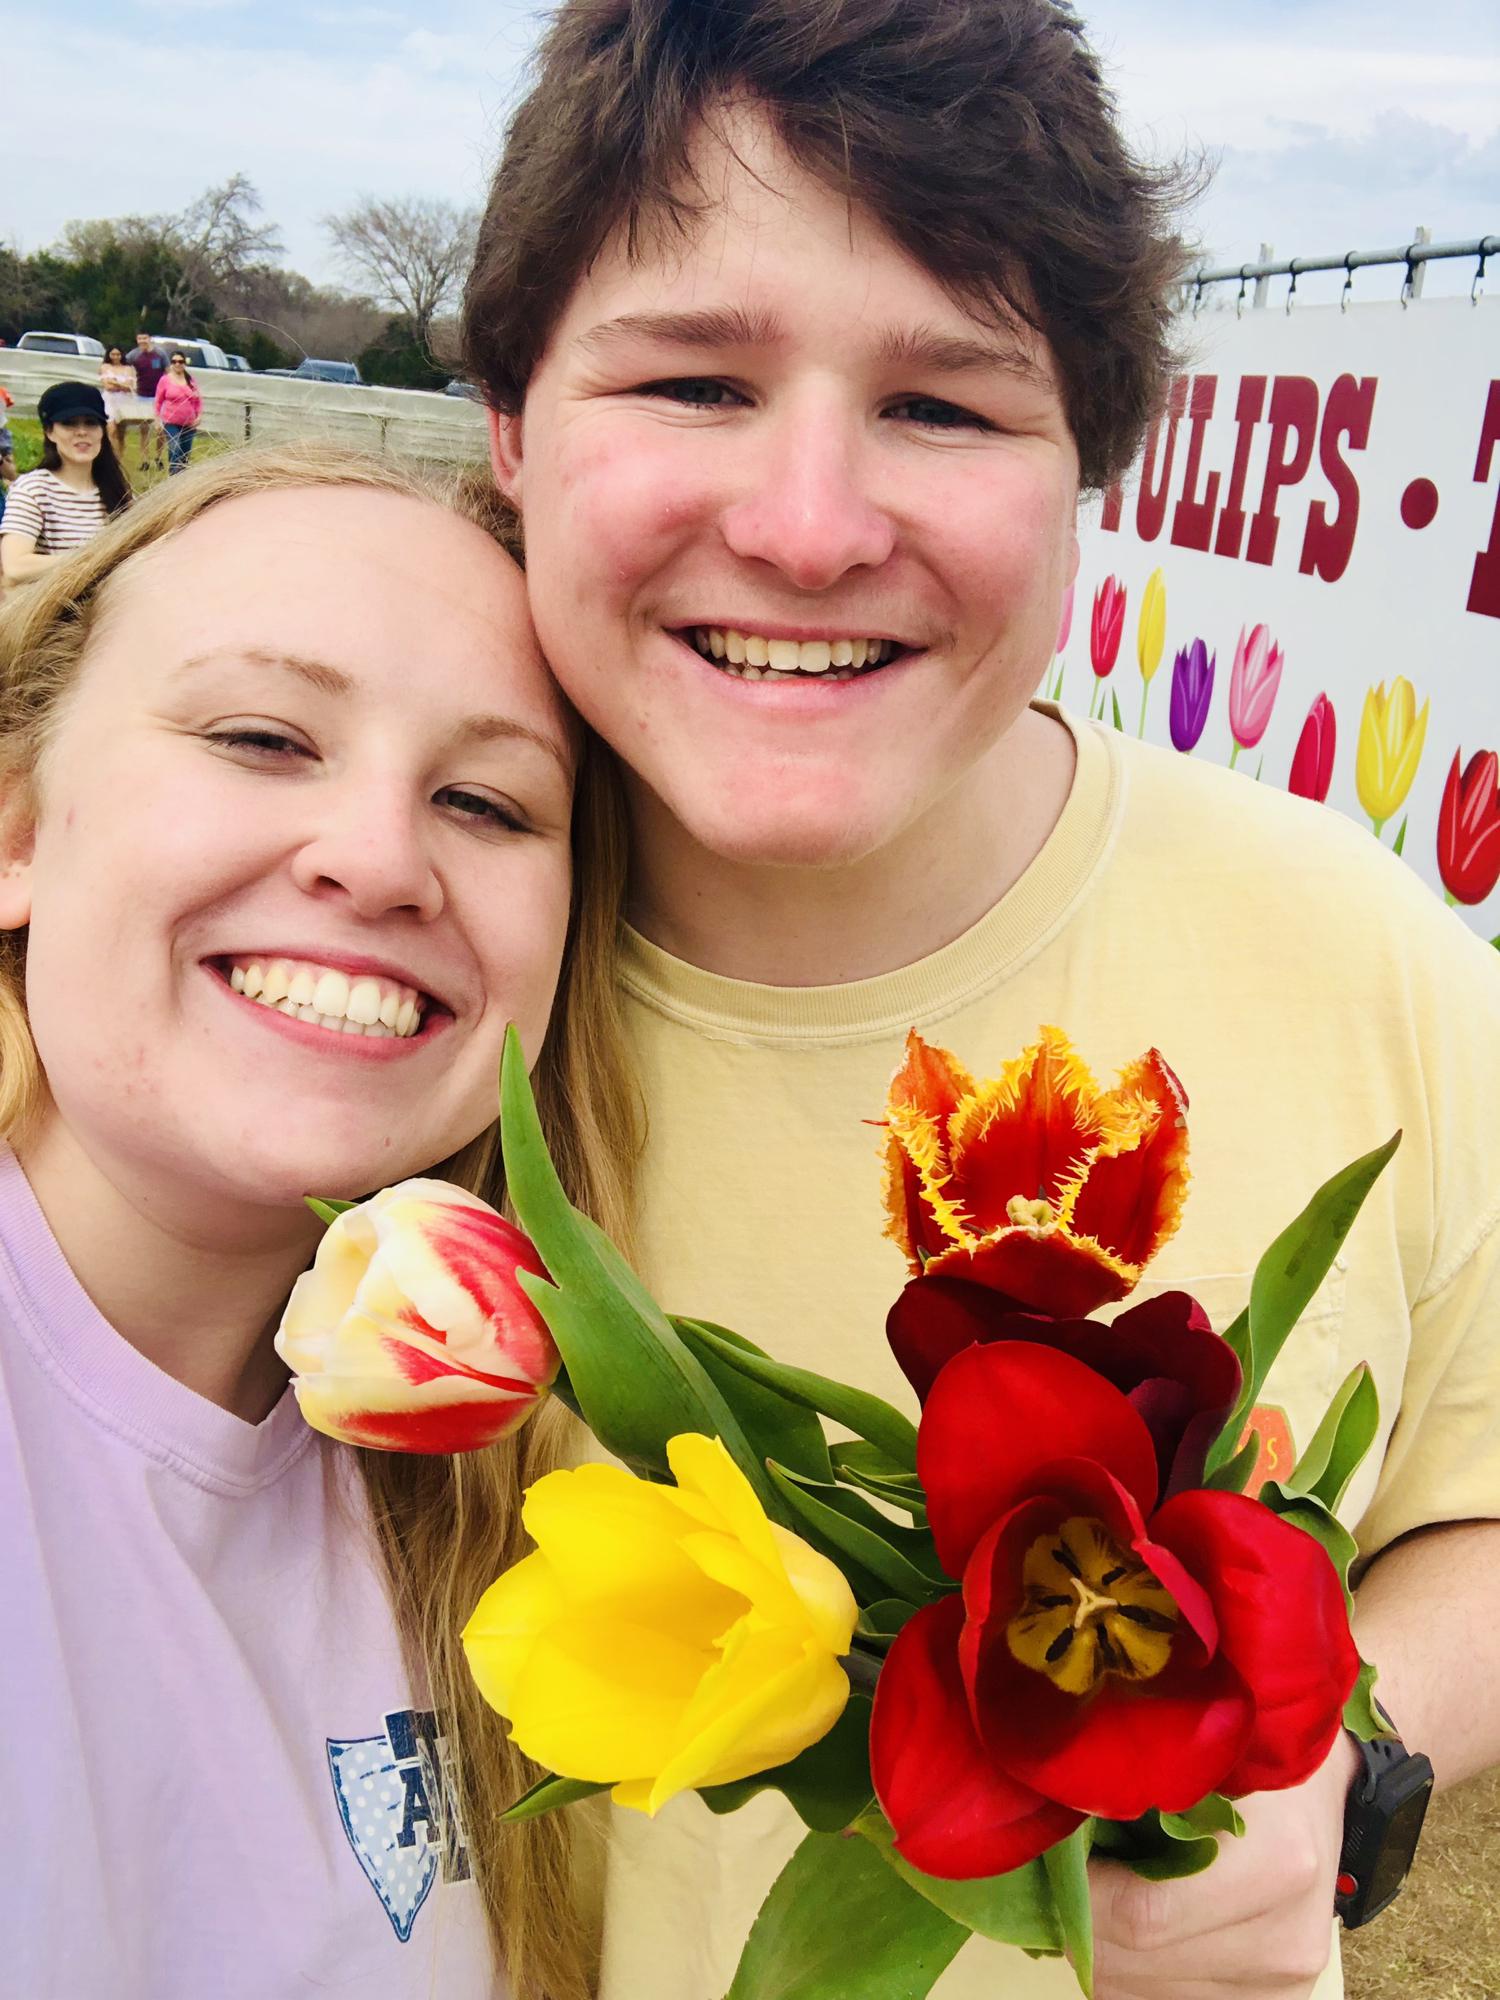 Our first road trip to the Texas Tulips farm - we later find out that we both wanted to say "I love you" once we made it back to College Station...